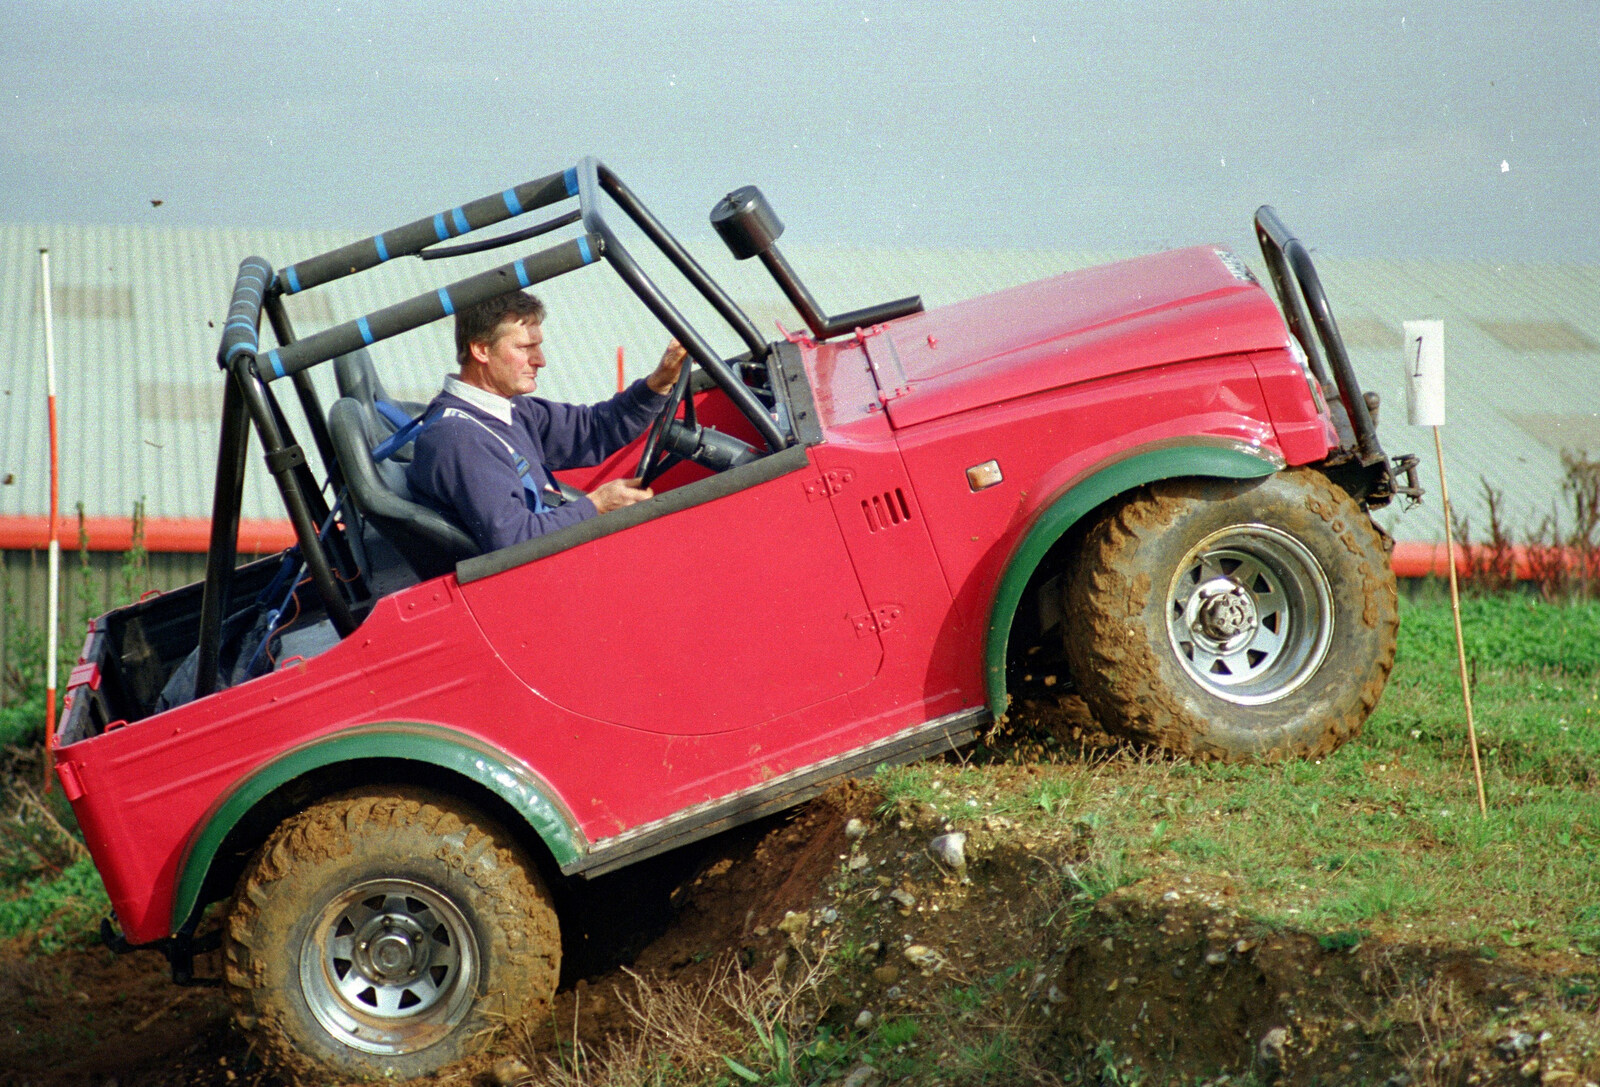 Off-Roading With Geoff and Brenda, Suffolk - 10th October 1994: Geoff takes on a large step and loses